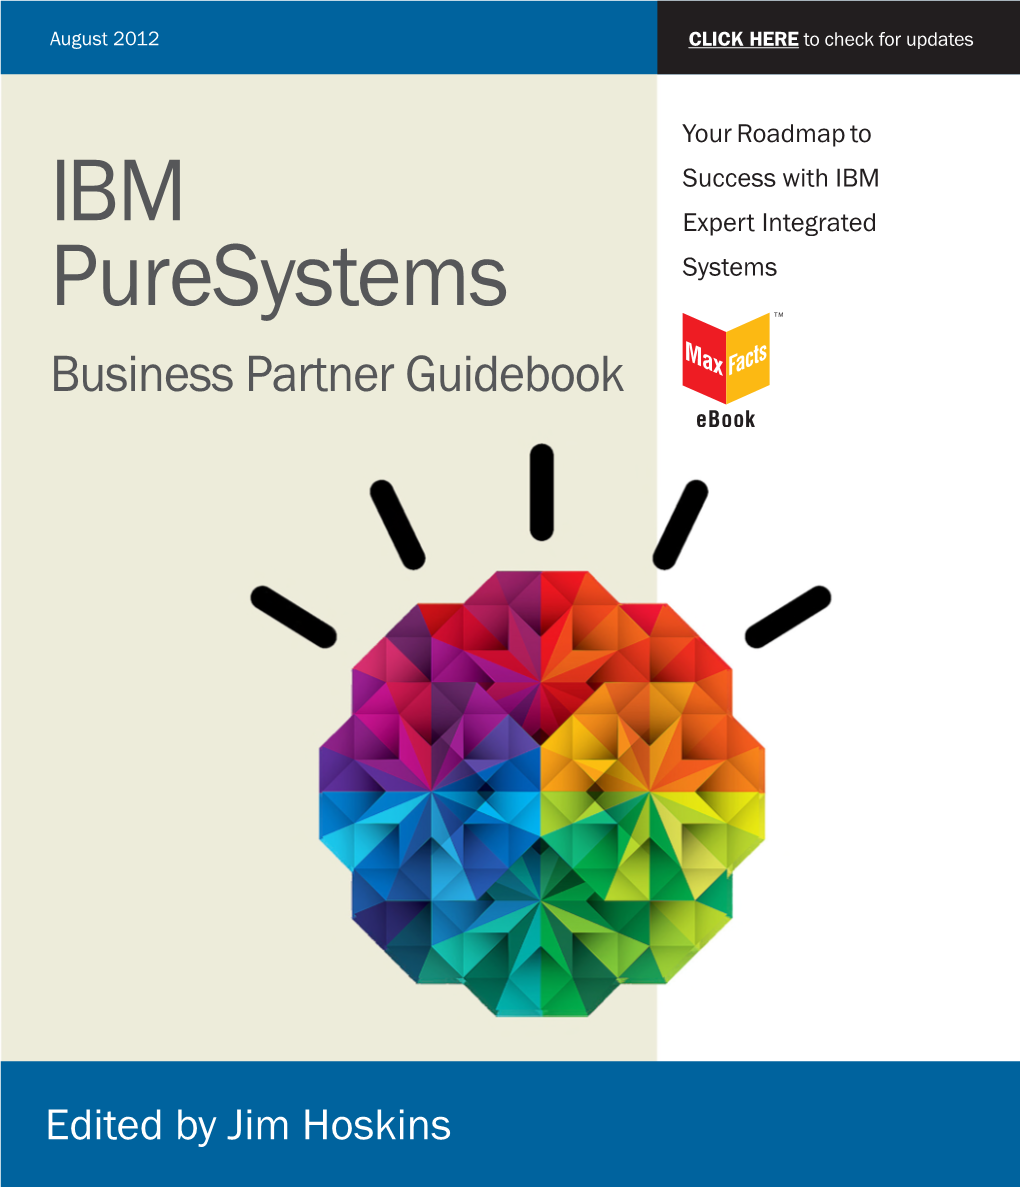 IBM Puresystems Business Partner Guidebook Other Titles of Interest